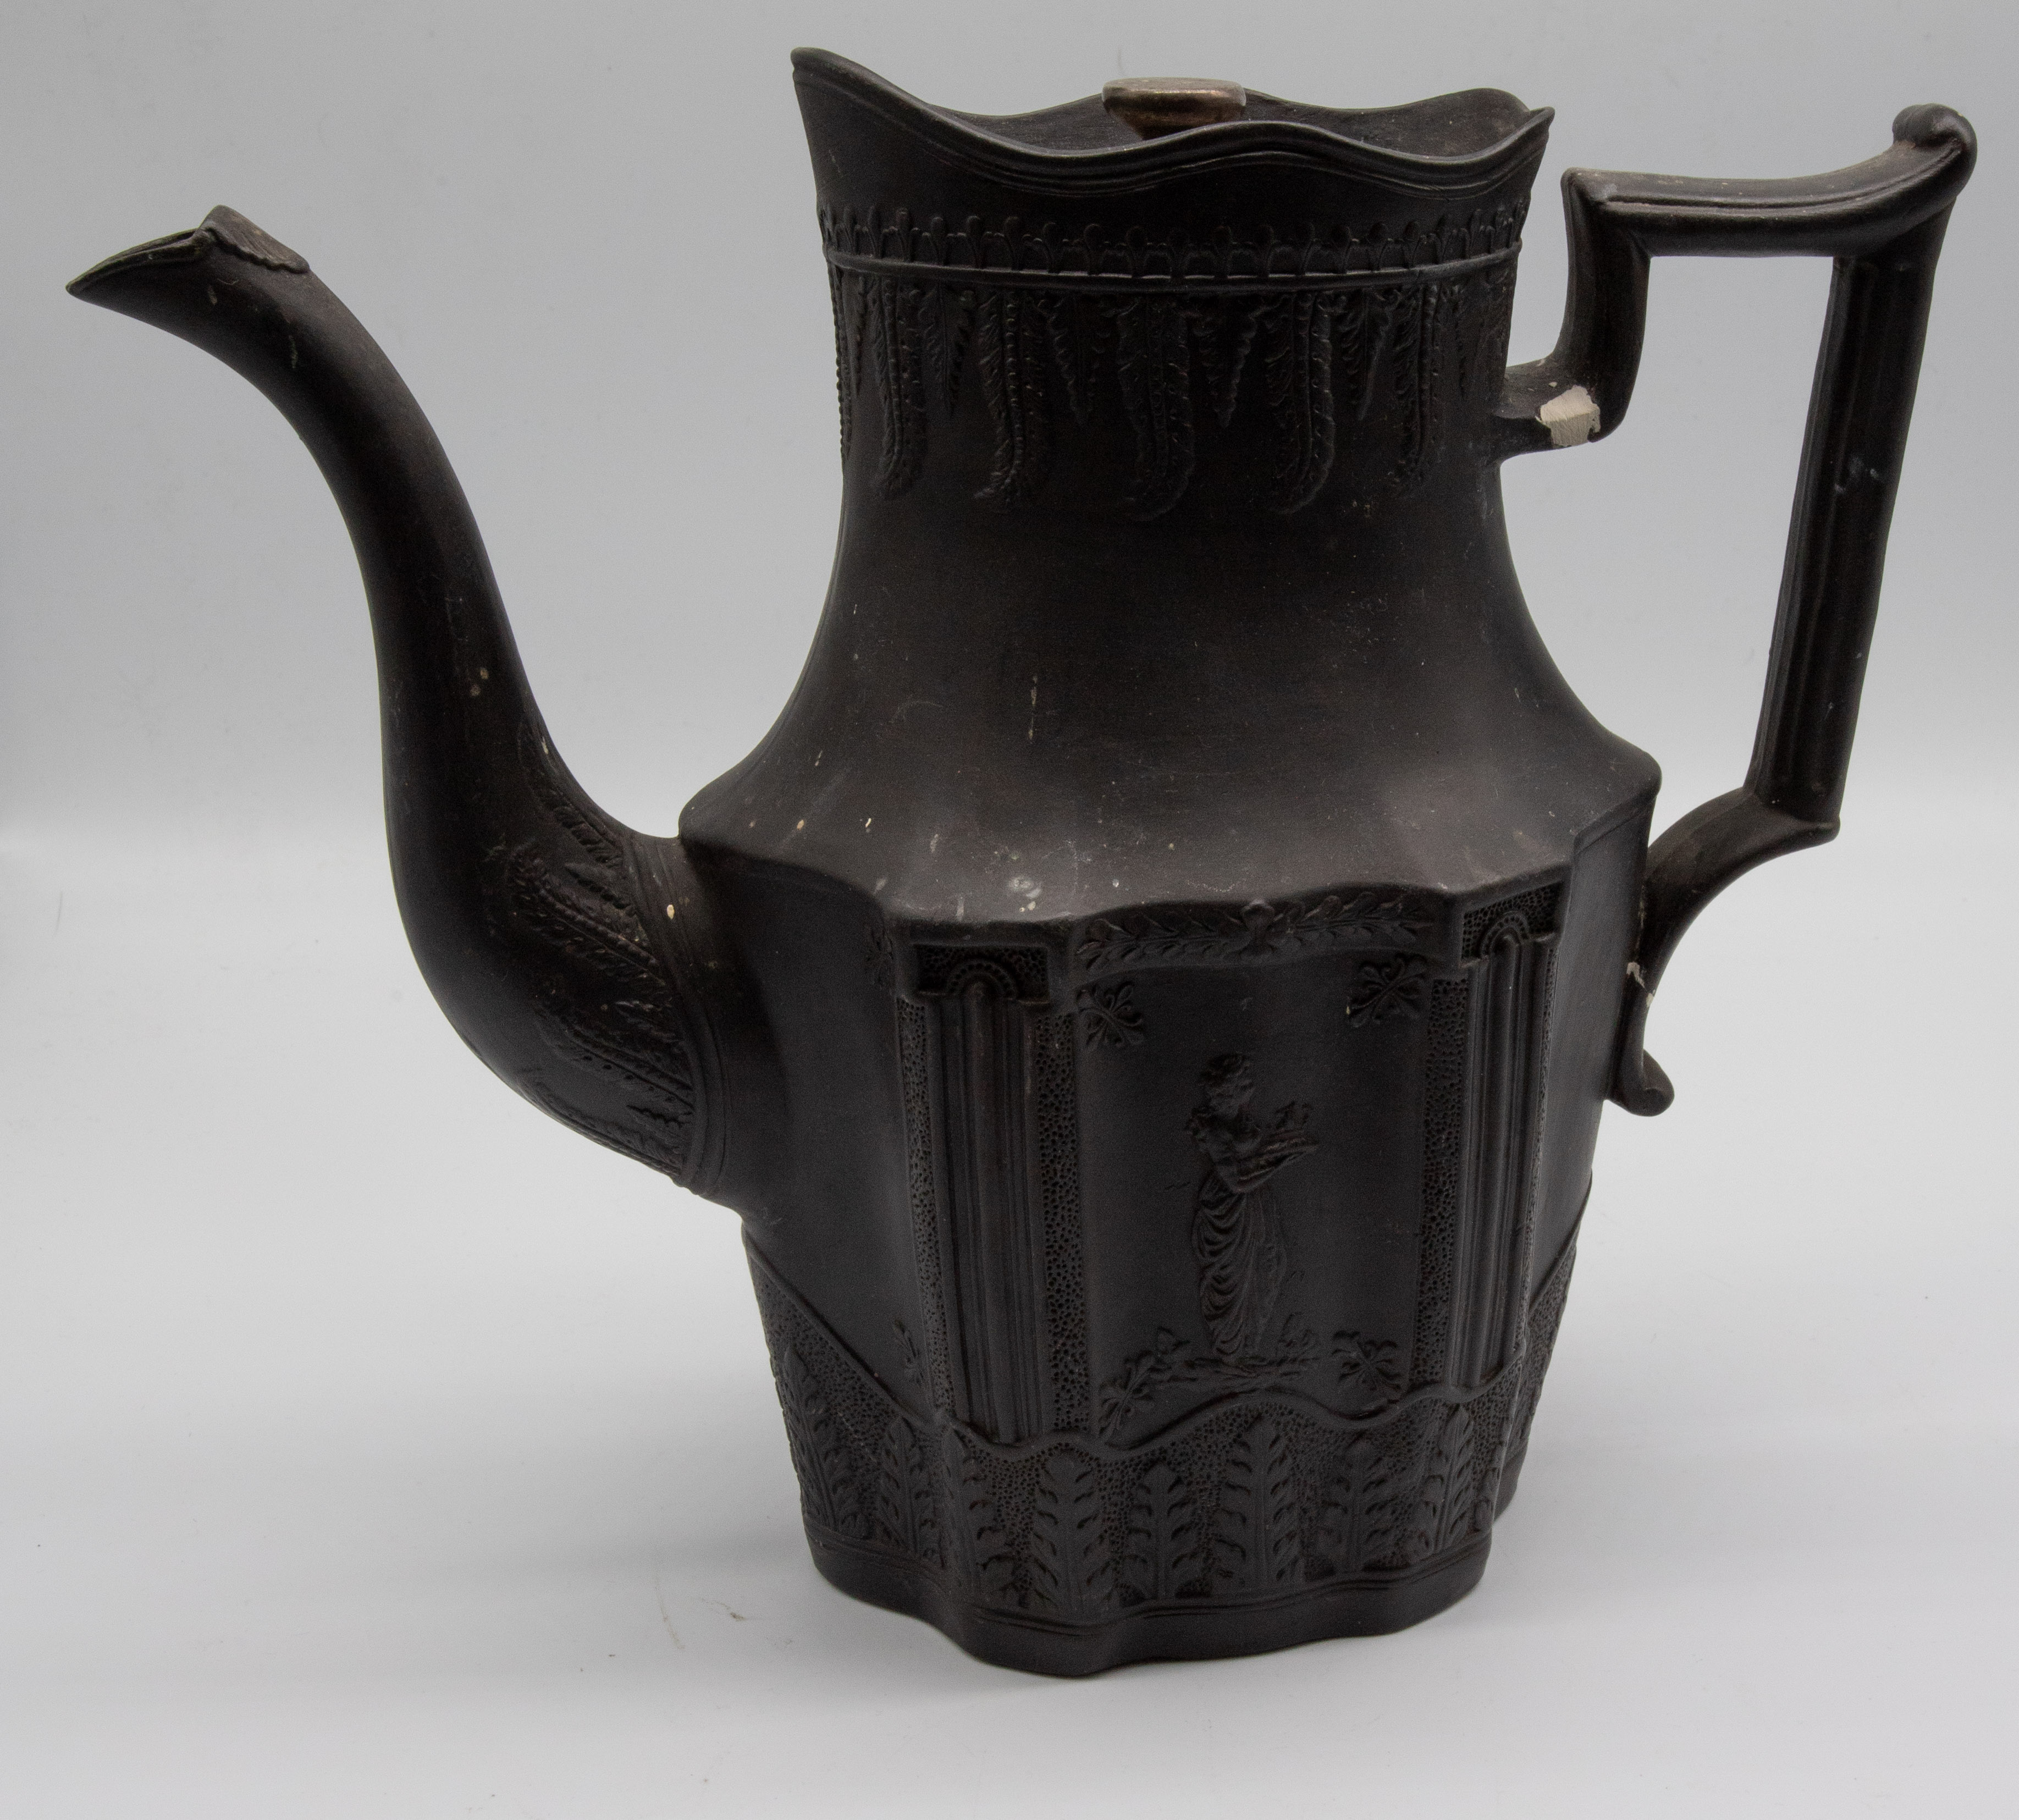 A Staffordshire black basalt coffee pot and metal cover, 19th century, unmarked, size 24cm high. - Image 2 of 7